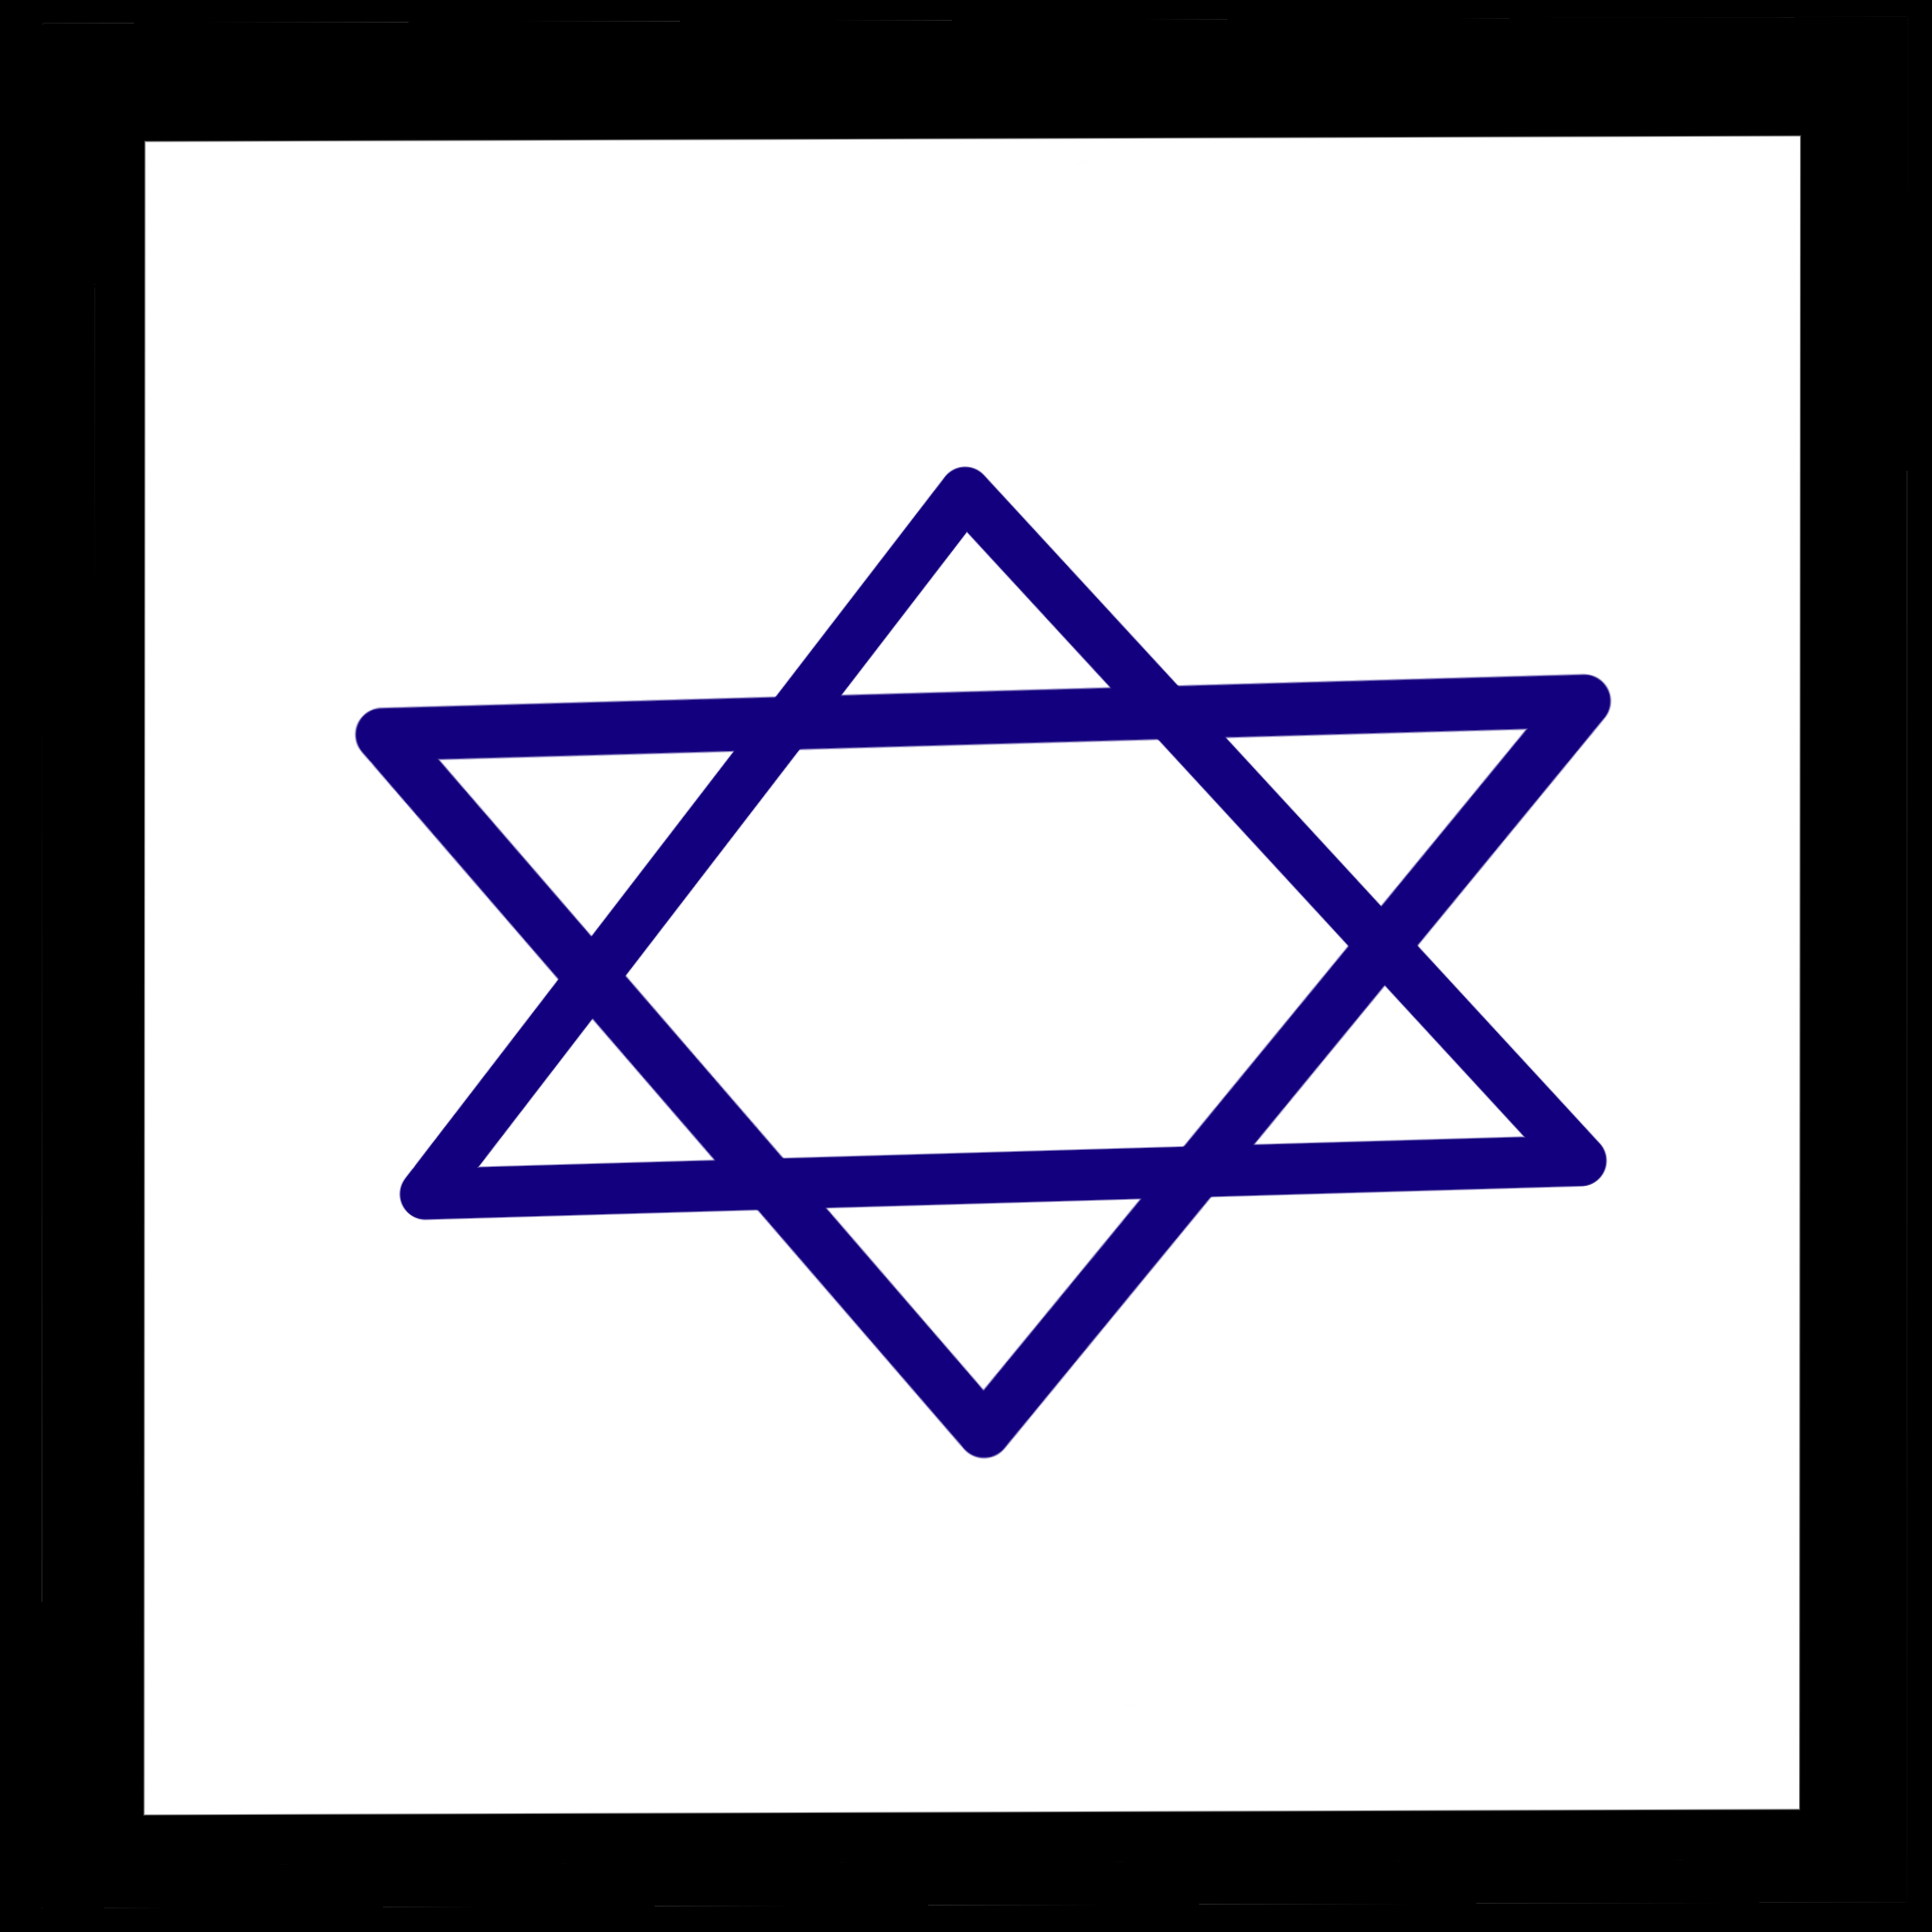 A black square with a blue Magen David in the center